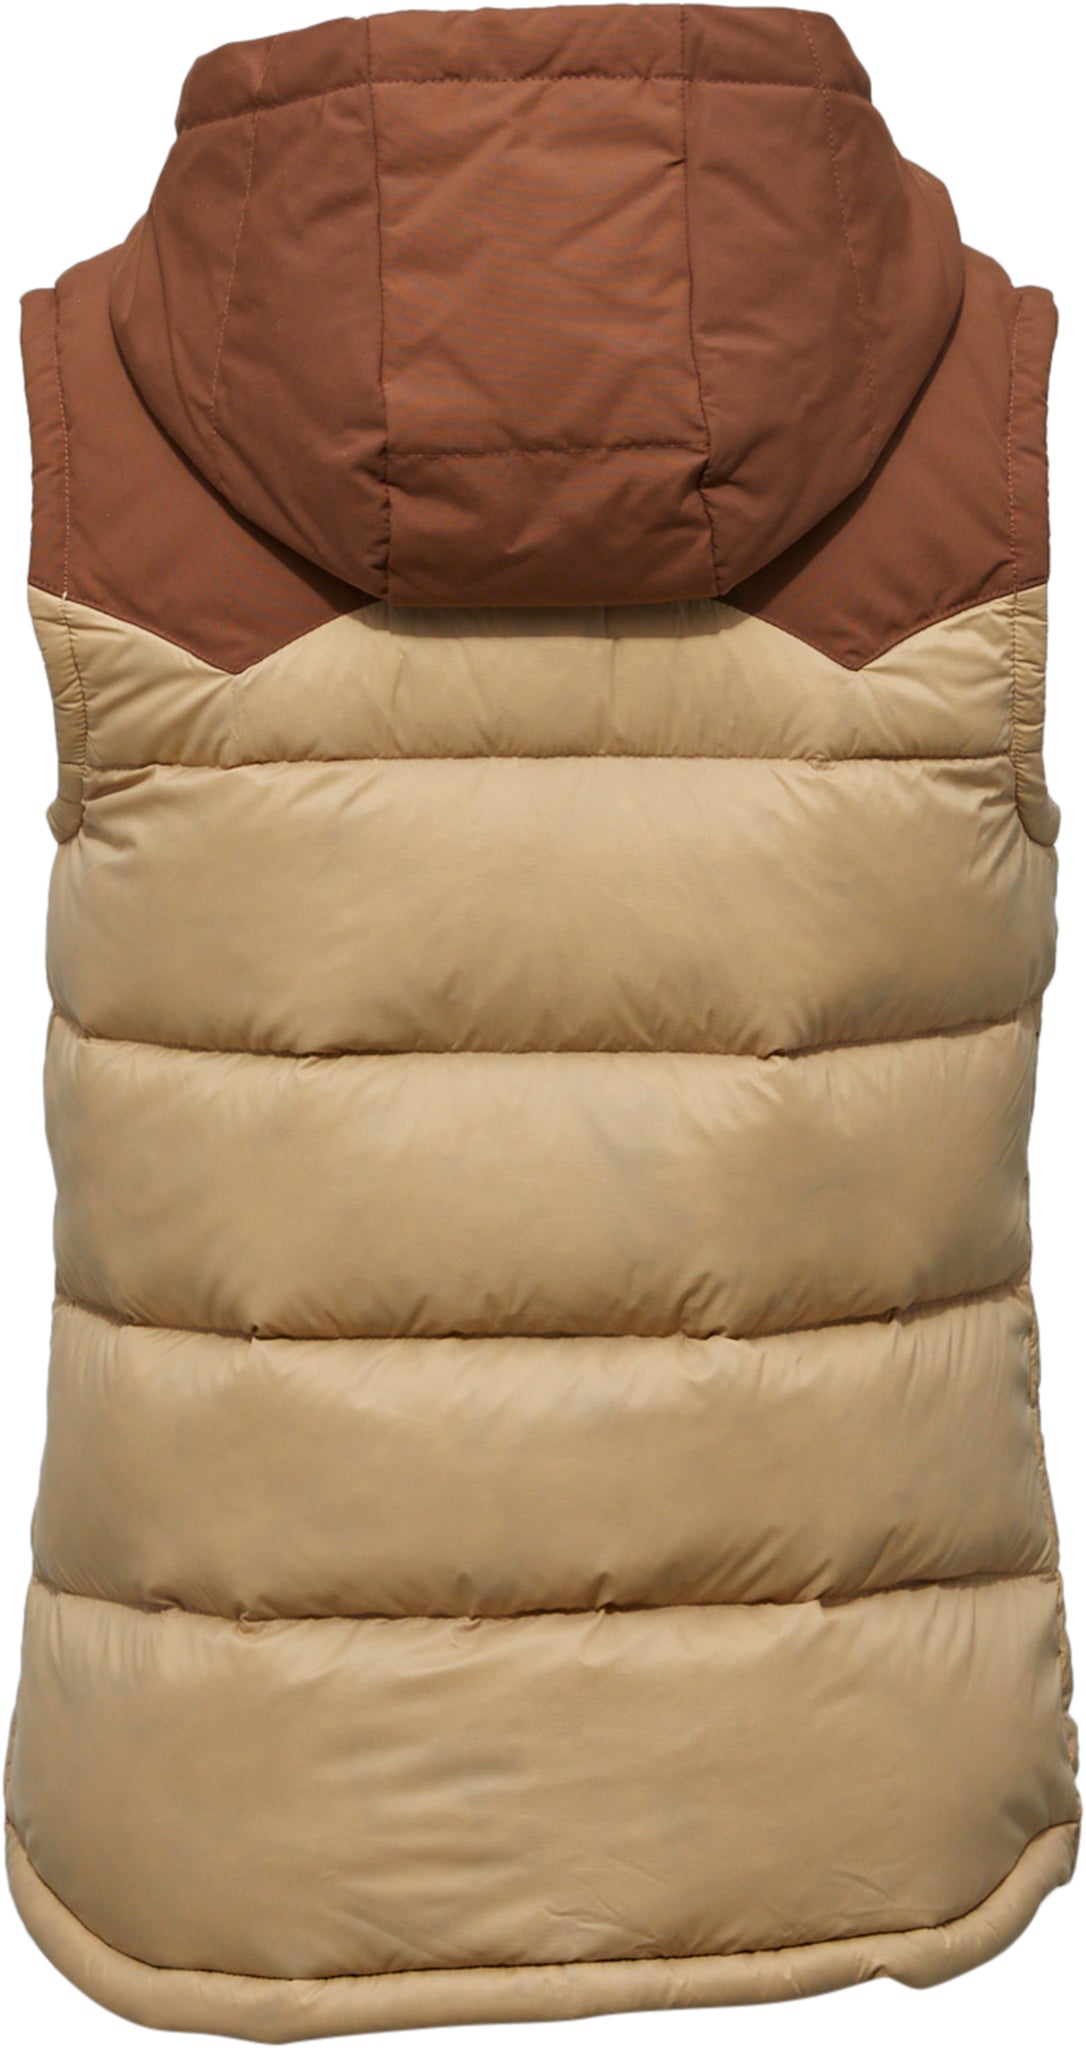 Patagonia Bivy Hooded Vest - Womens, FREE SHIPPING in Canada